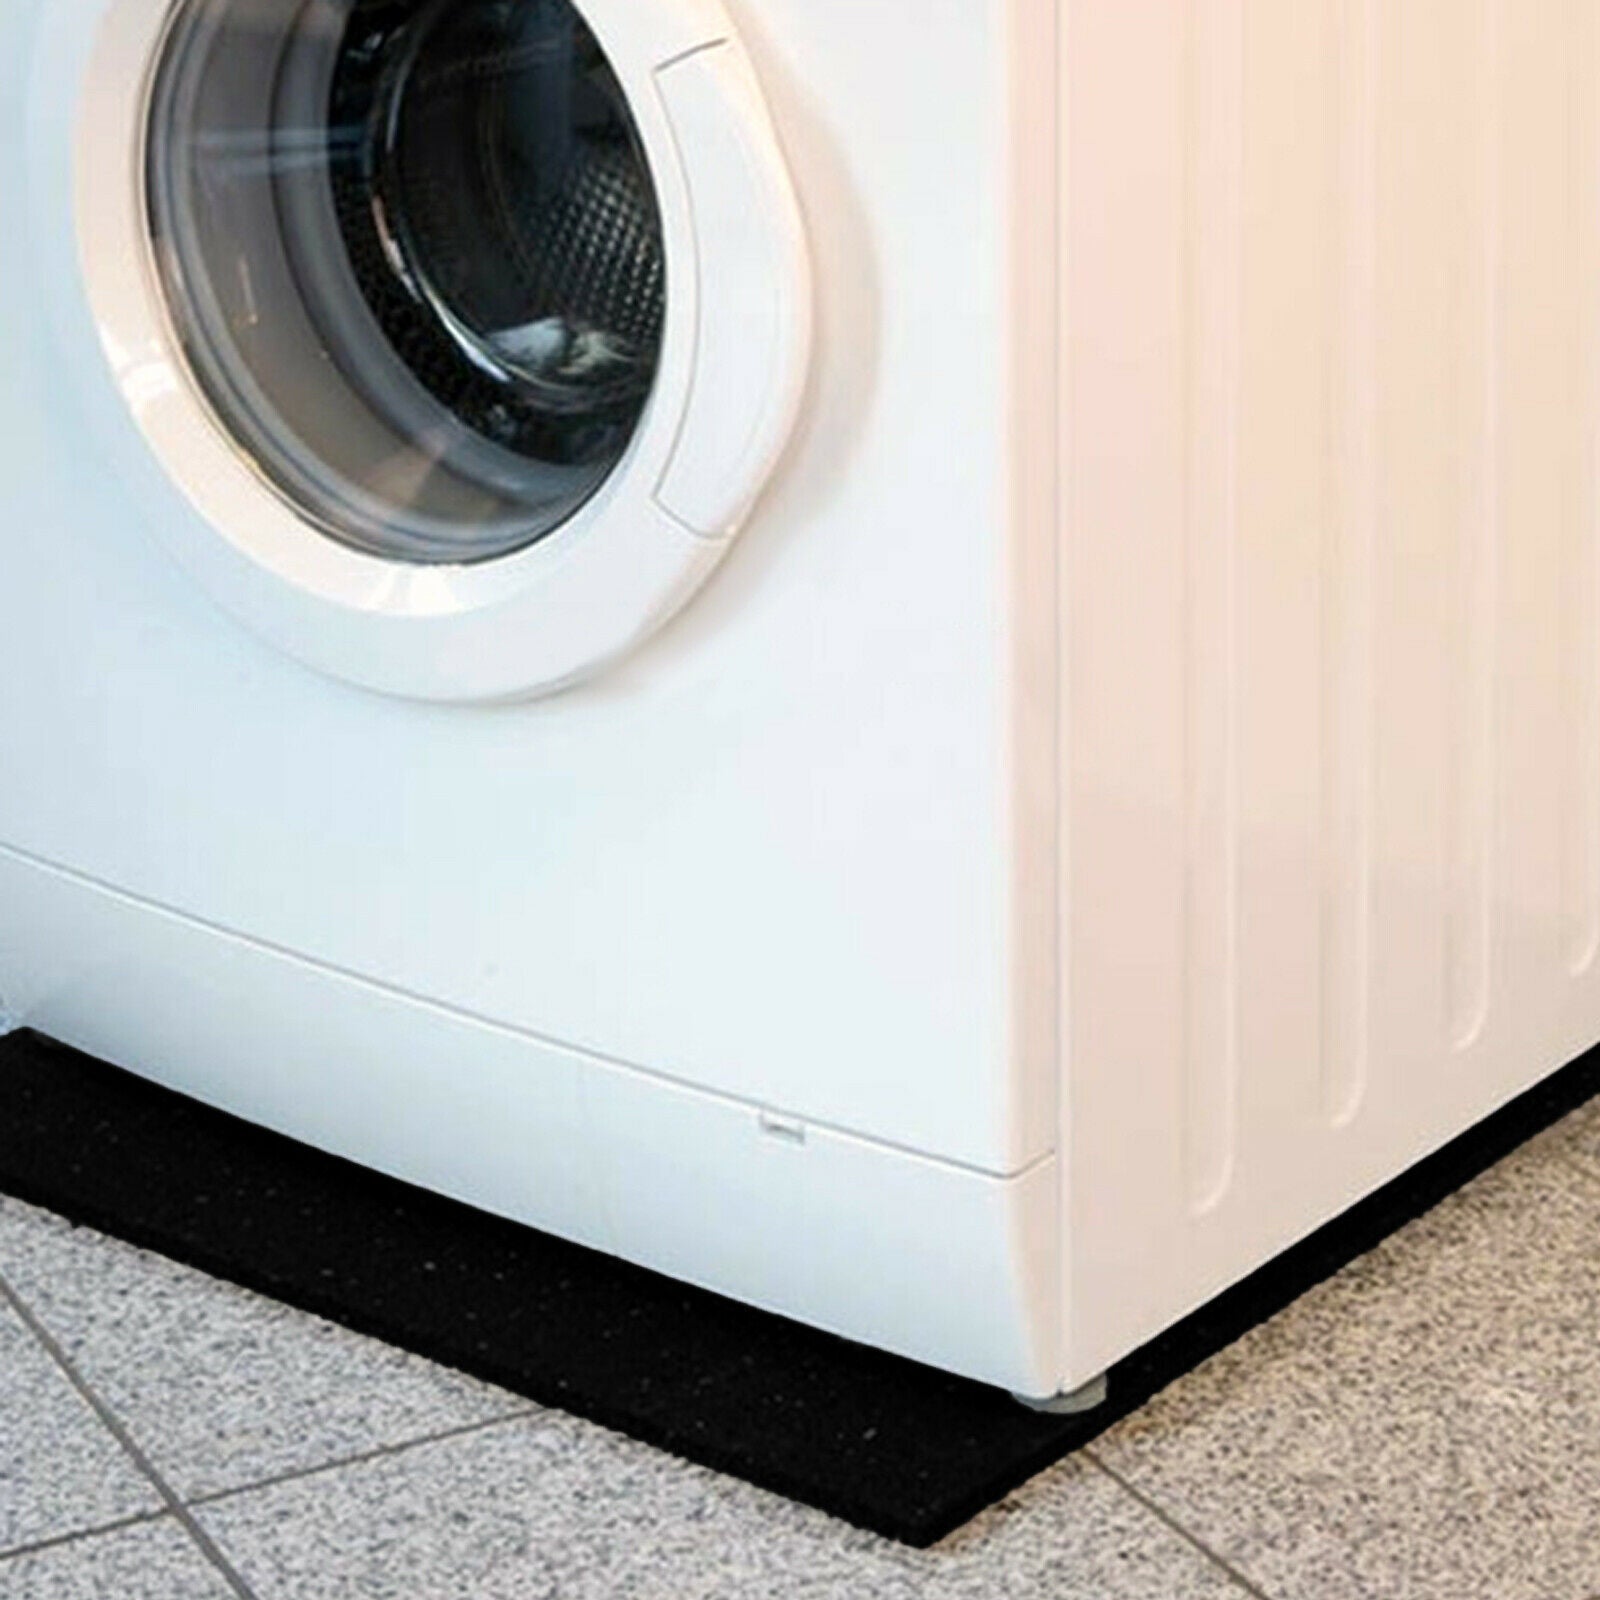 Universal - will fit all makes and models of washing machine and tumble dryer